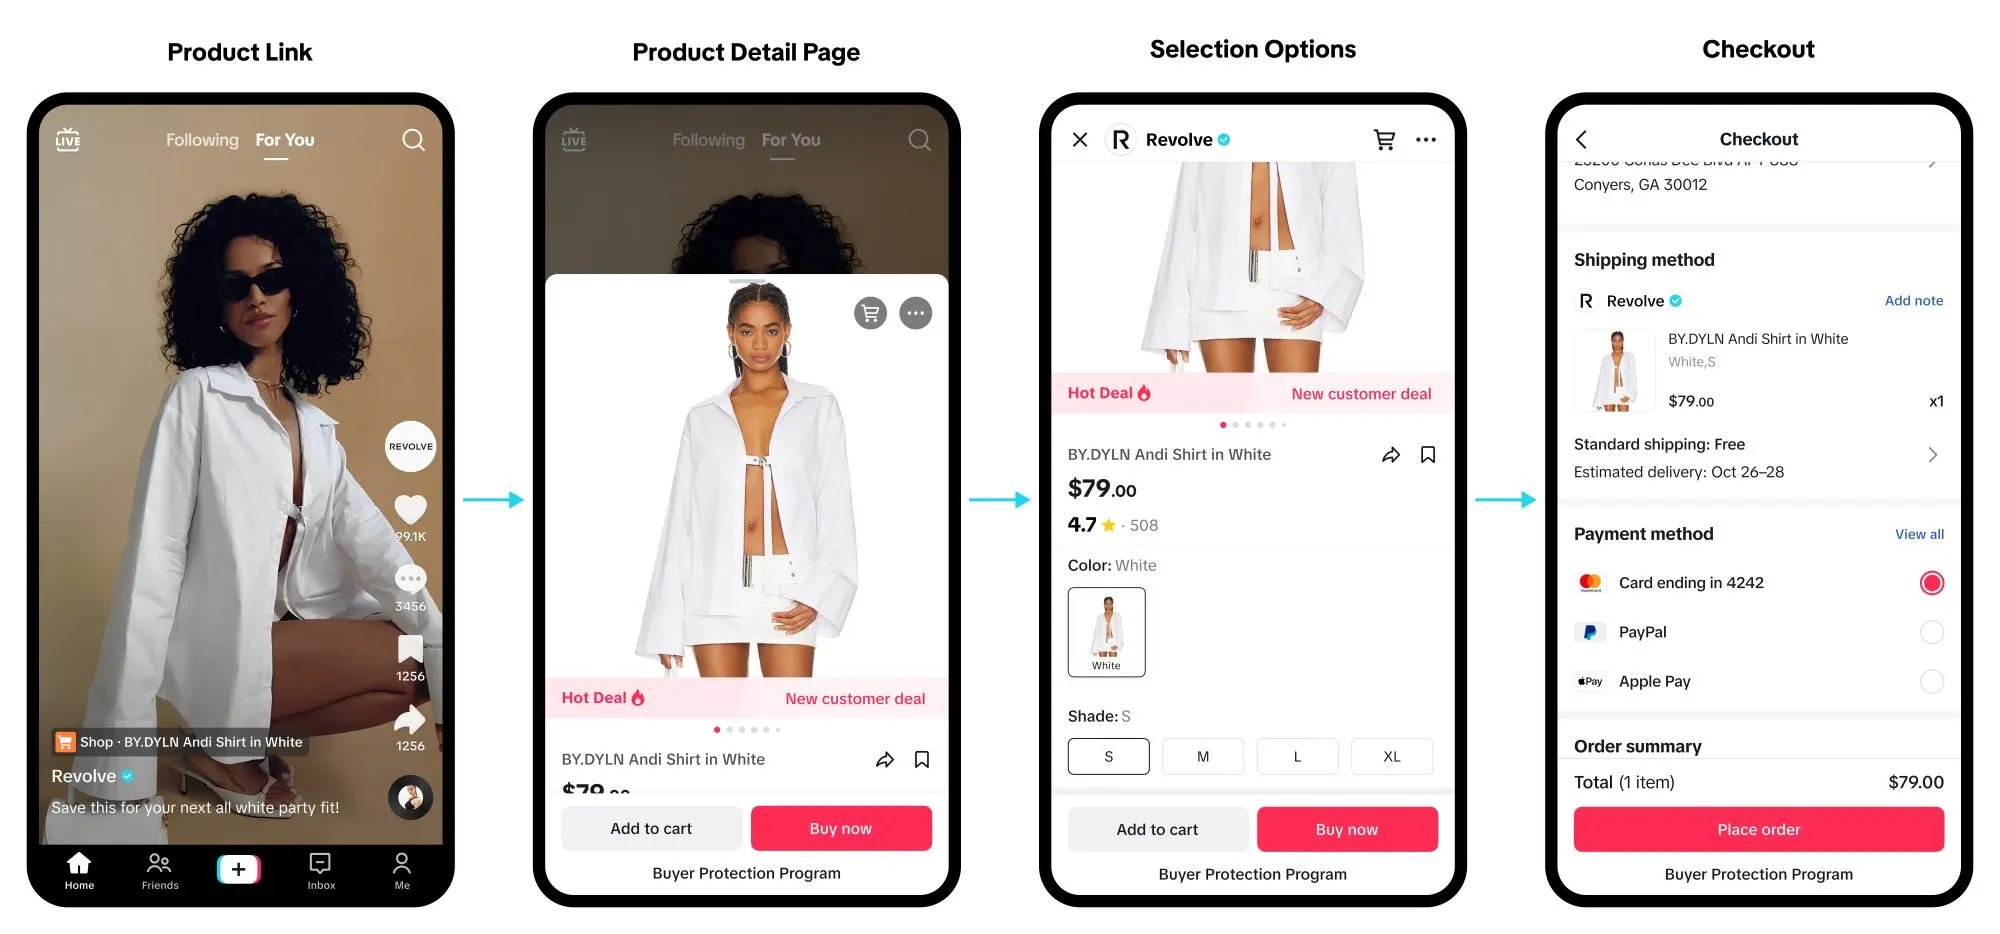 TikTok Shop Image Including Product Link, Product Detail Page, Selection Options, Checkout